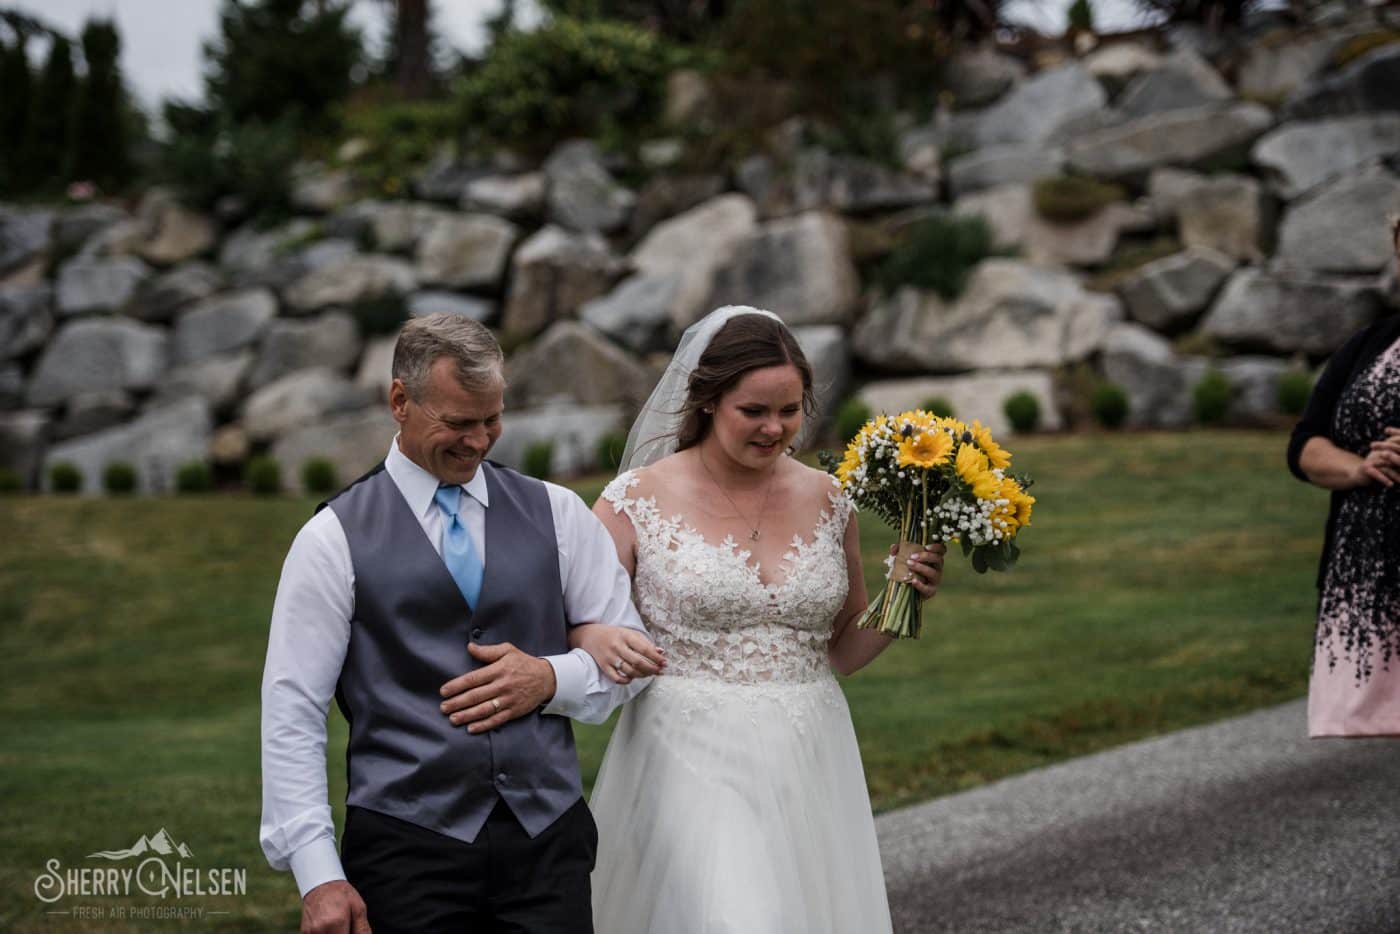 father walks his daughter down the aisle to be married